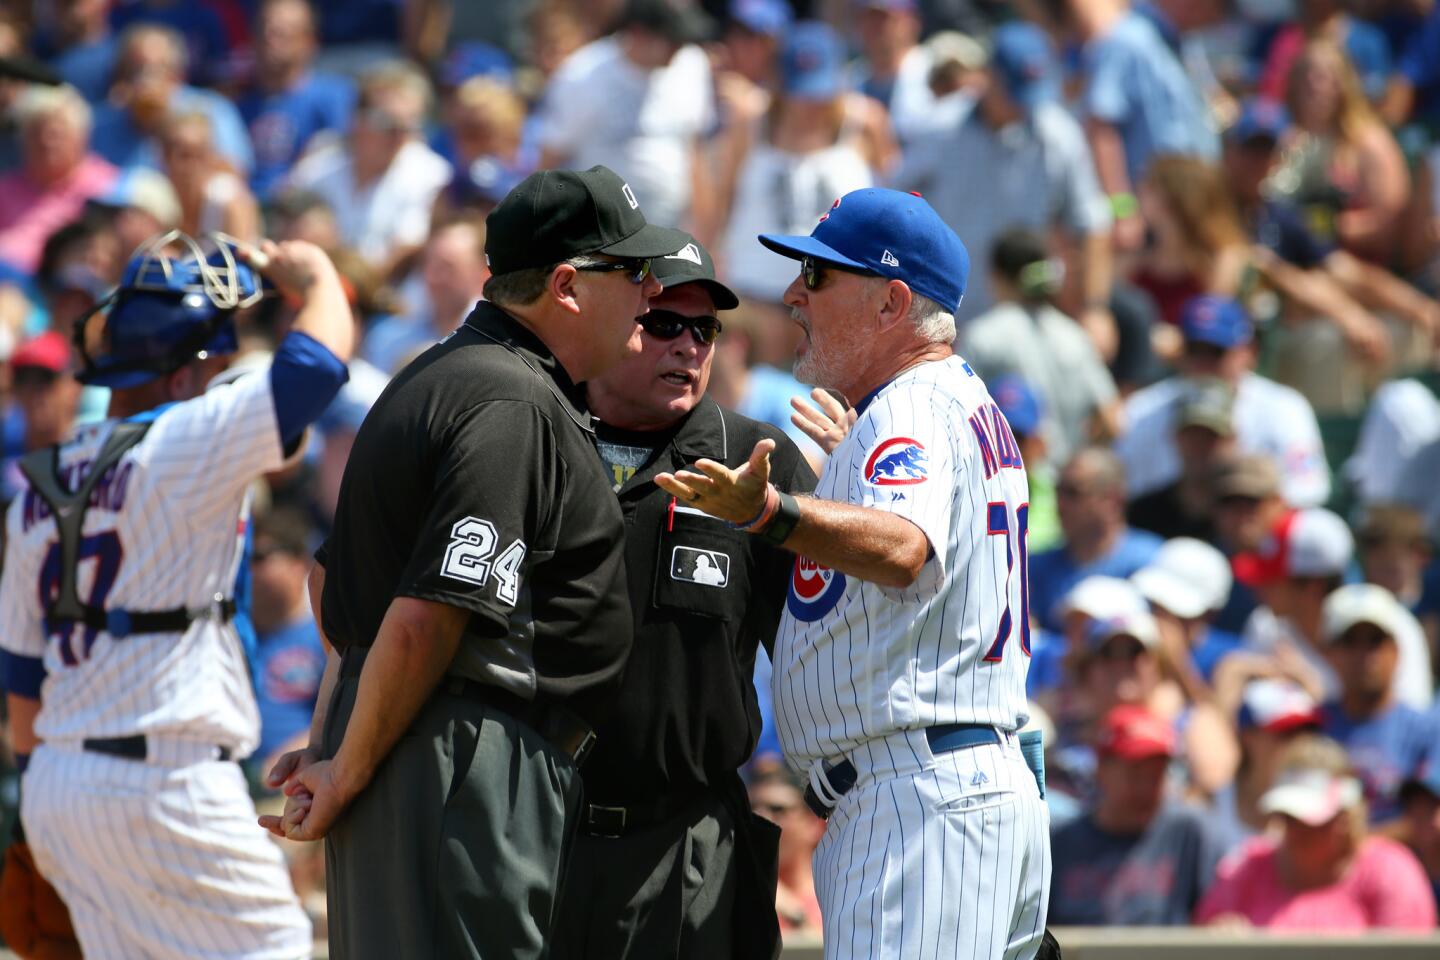 Joe Maddon argues with the umpires in the fifth inning about a pitch by Jake Arrieta they claimed hit the batter, Charlie Blackmon, during a game against the Rockies at Wrigley Field in Chicago on Sunday, June 11, 2017.